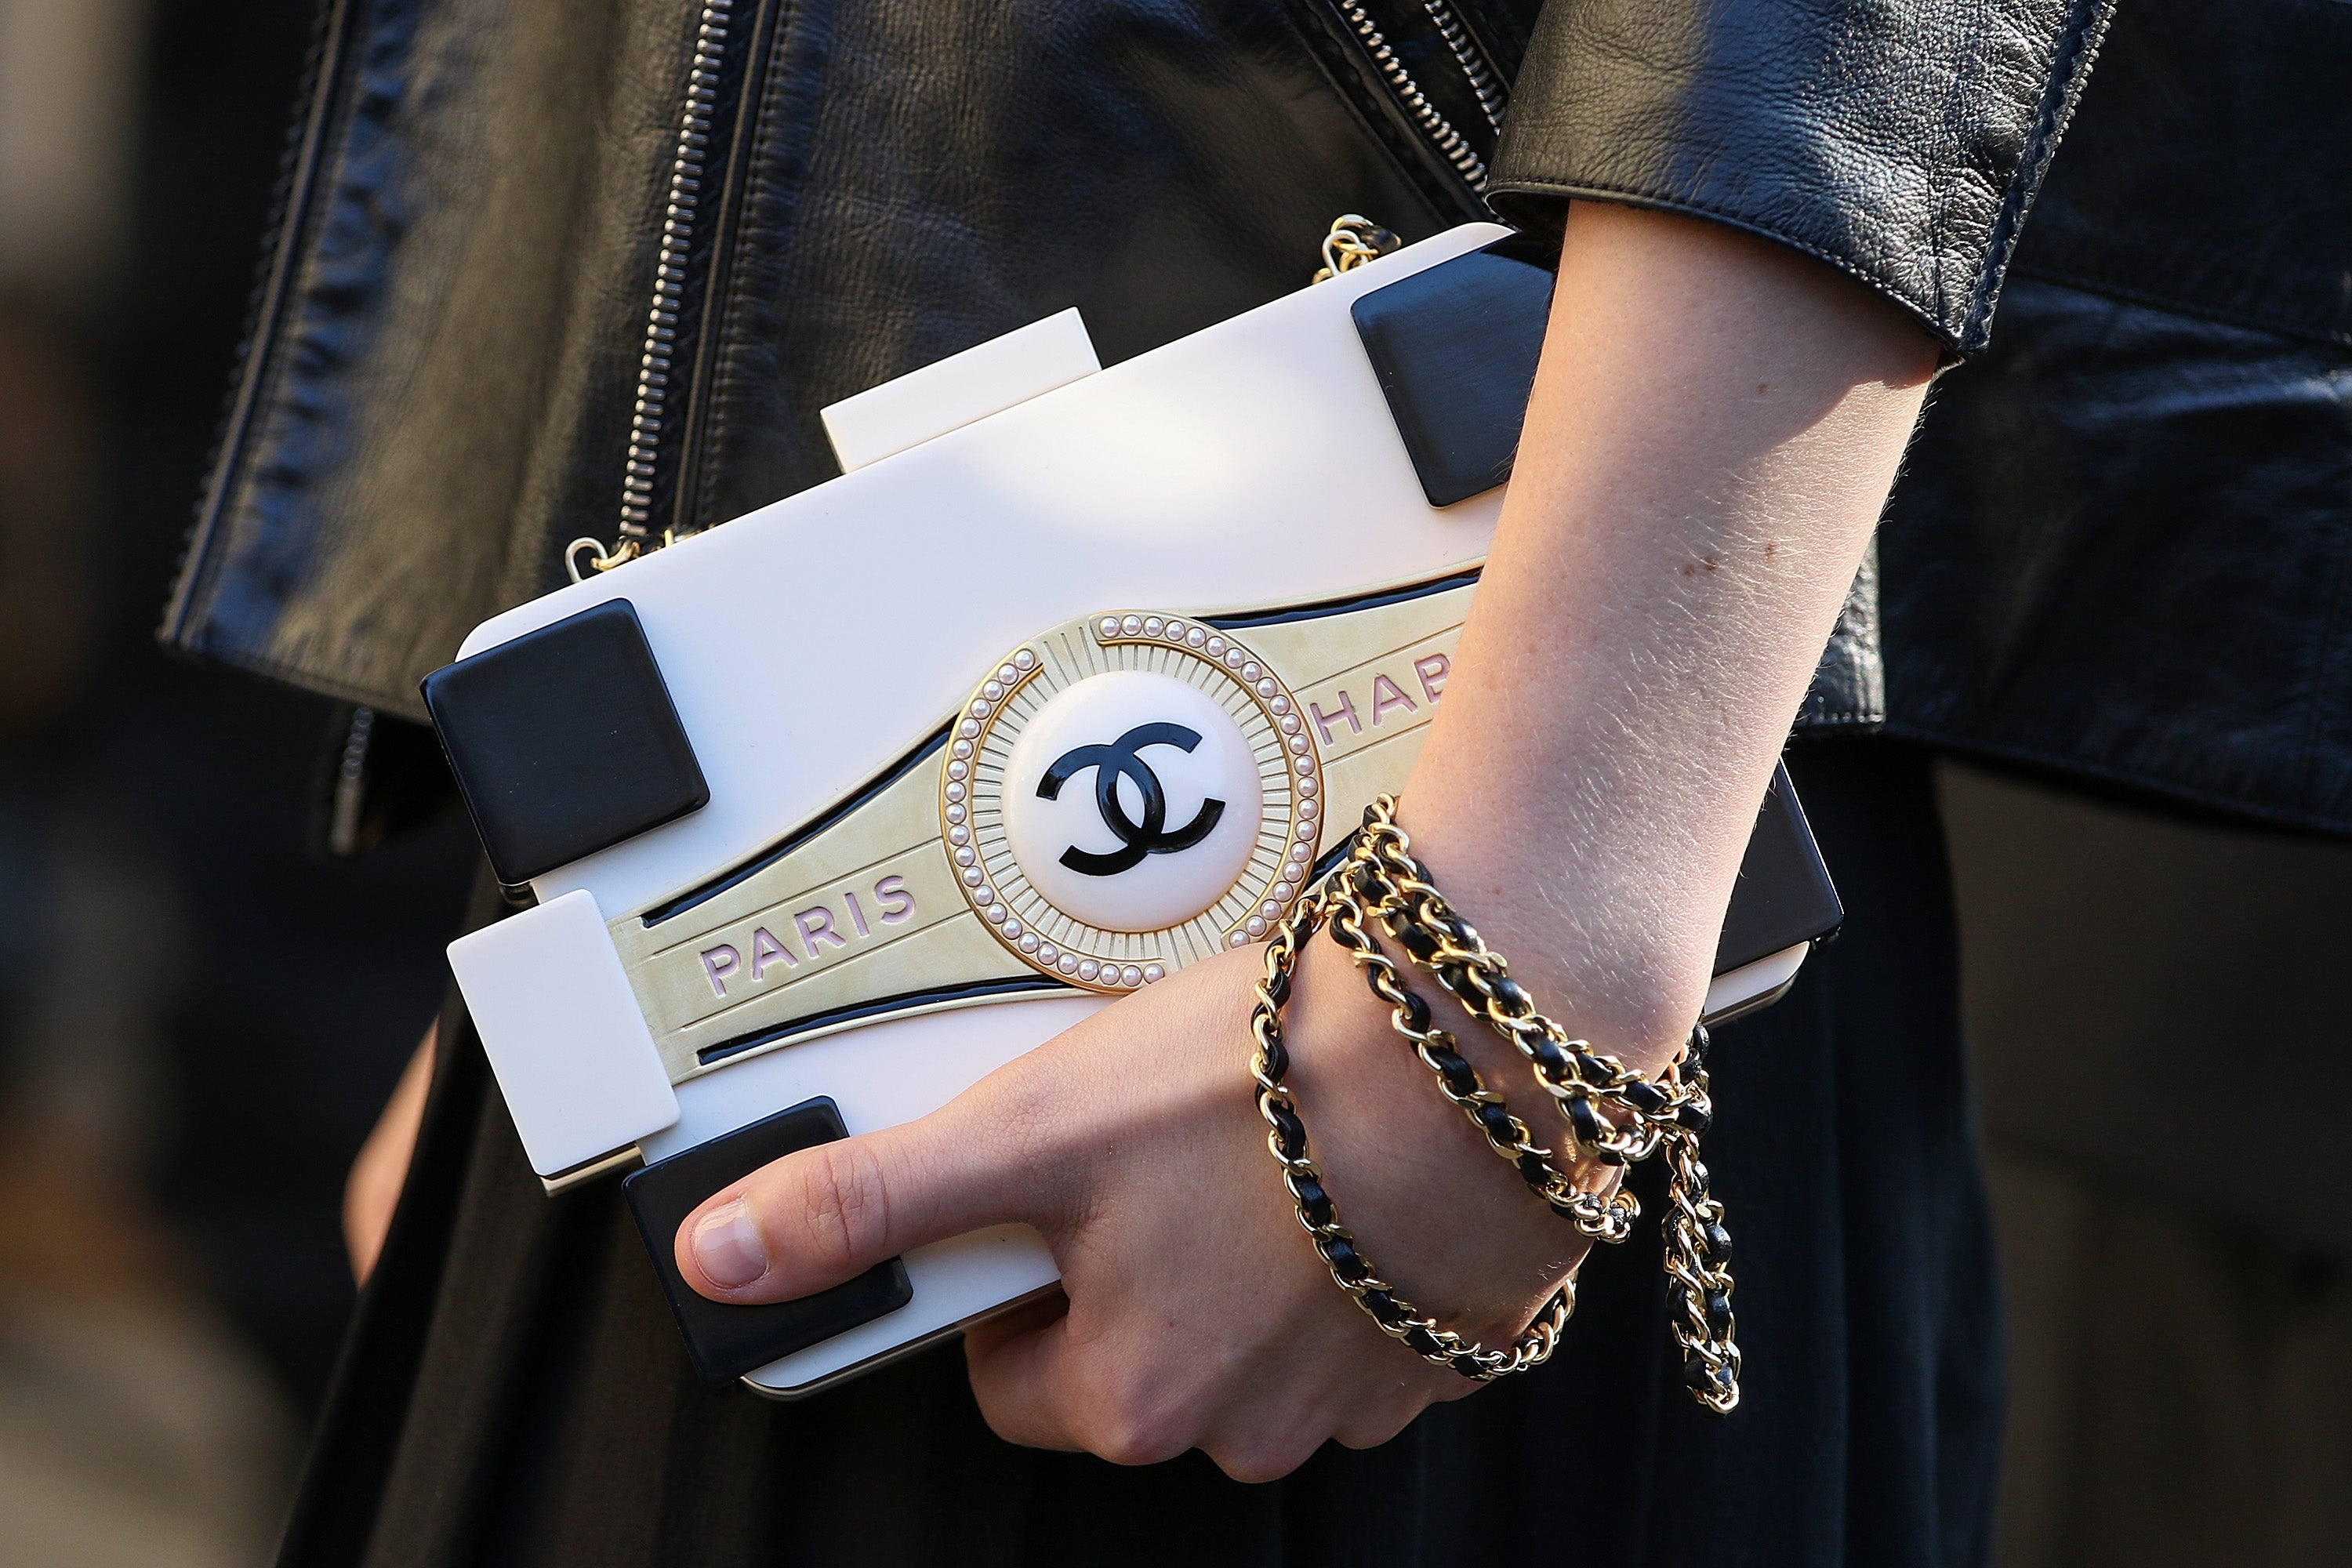 Must have Chanel bag, the Lego clutch